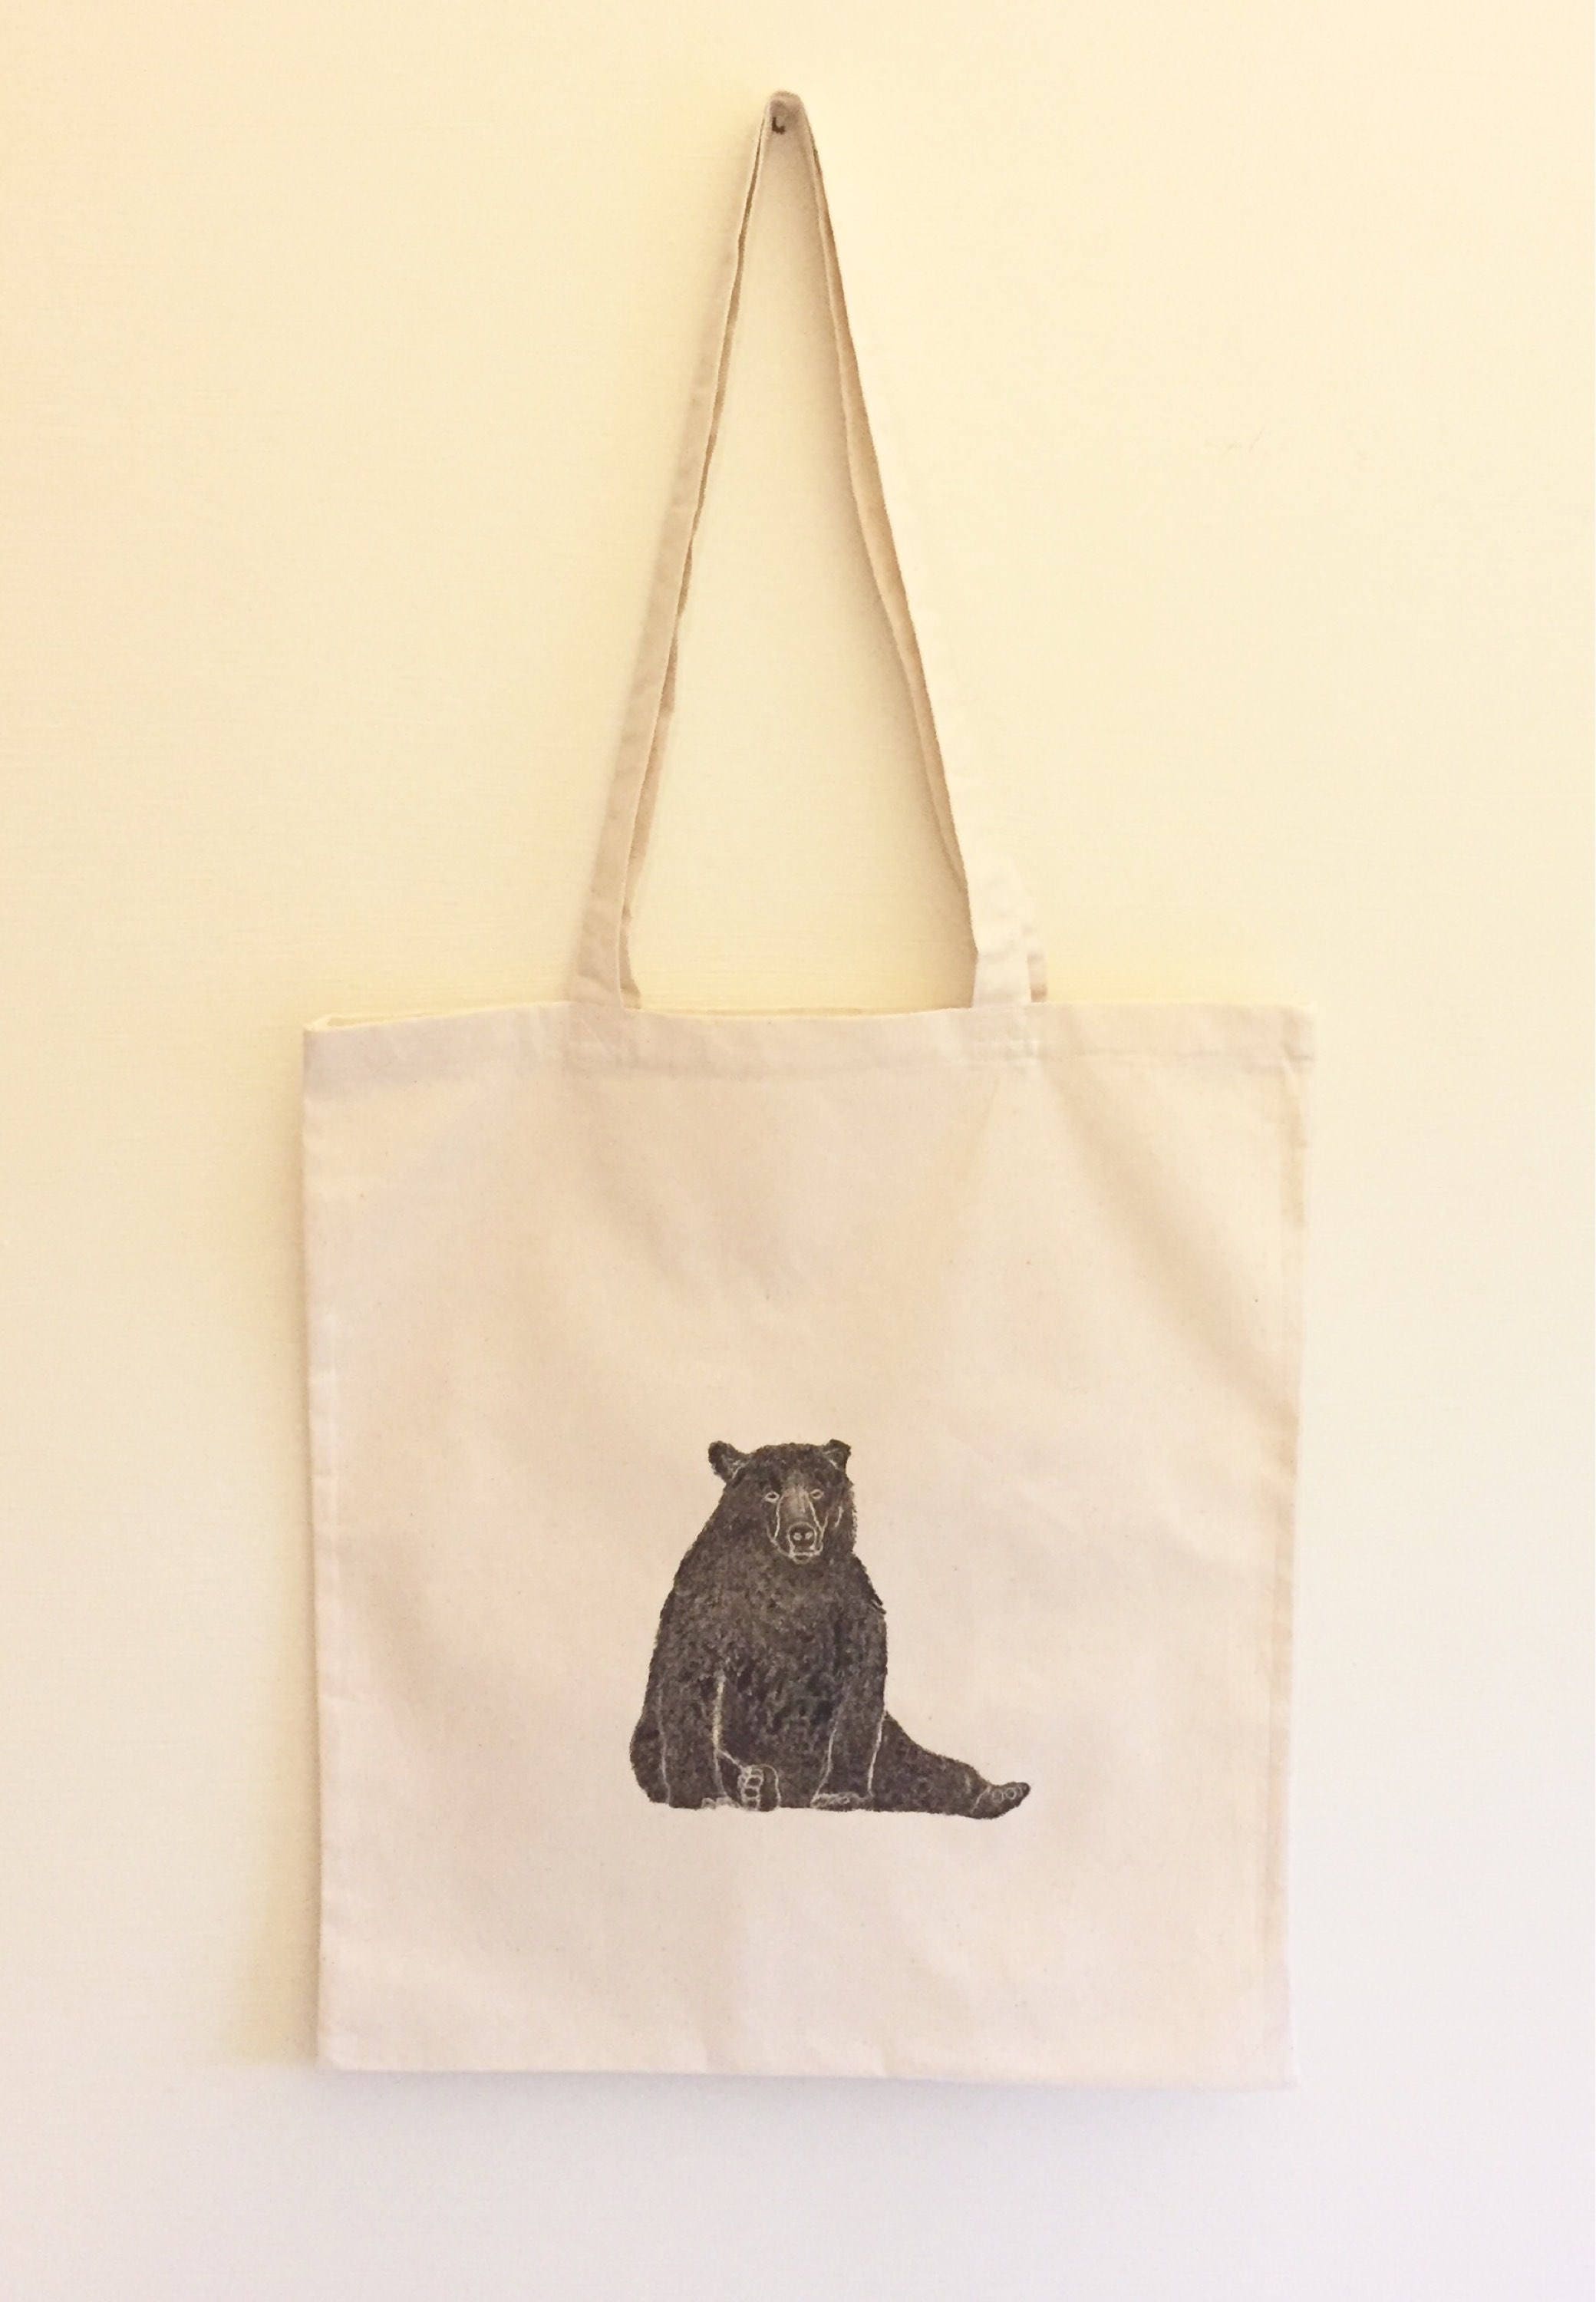 Brown bear Tote Bag 100% cotton Grizzly bear Eco | Etsy